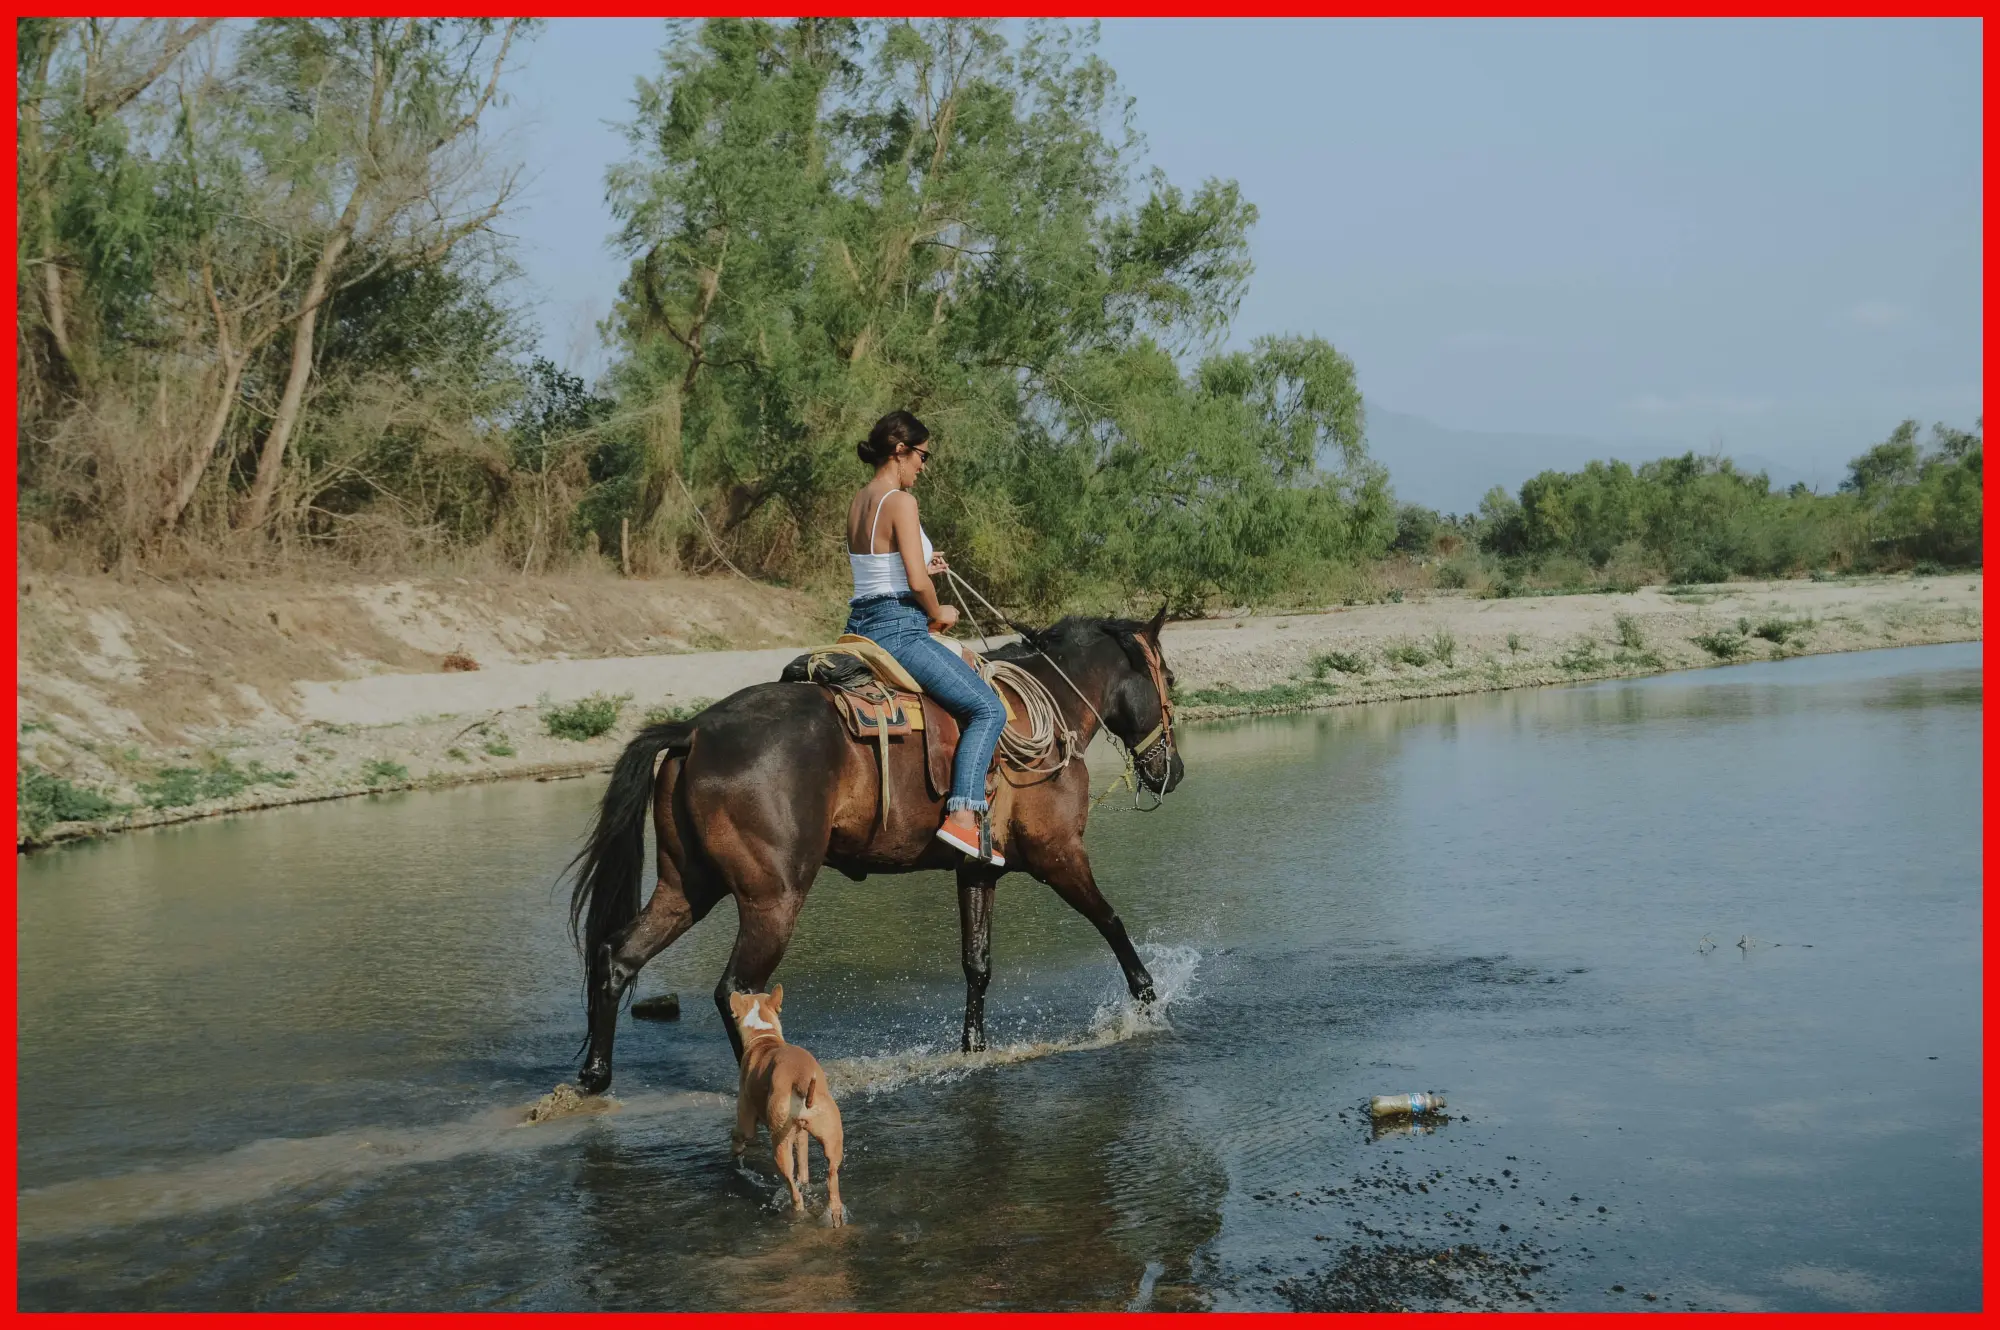 A person riding a horse across a shallow river followed by a loyal dog, with lush greenery framing the serene scene.